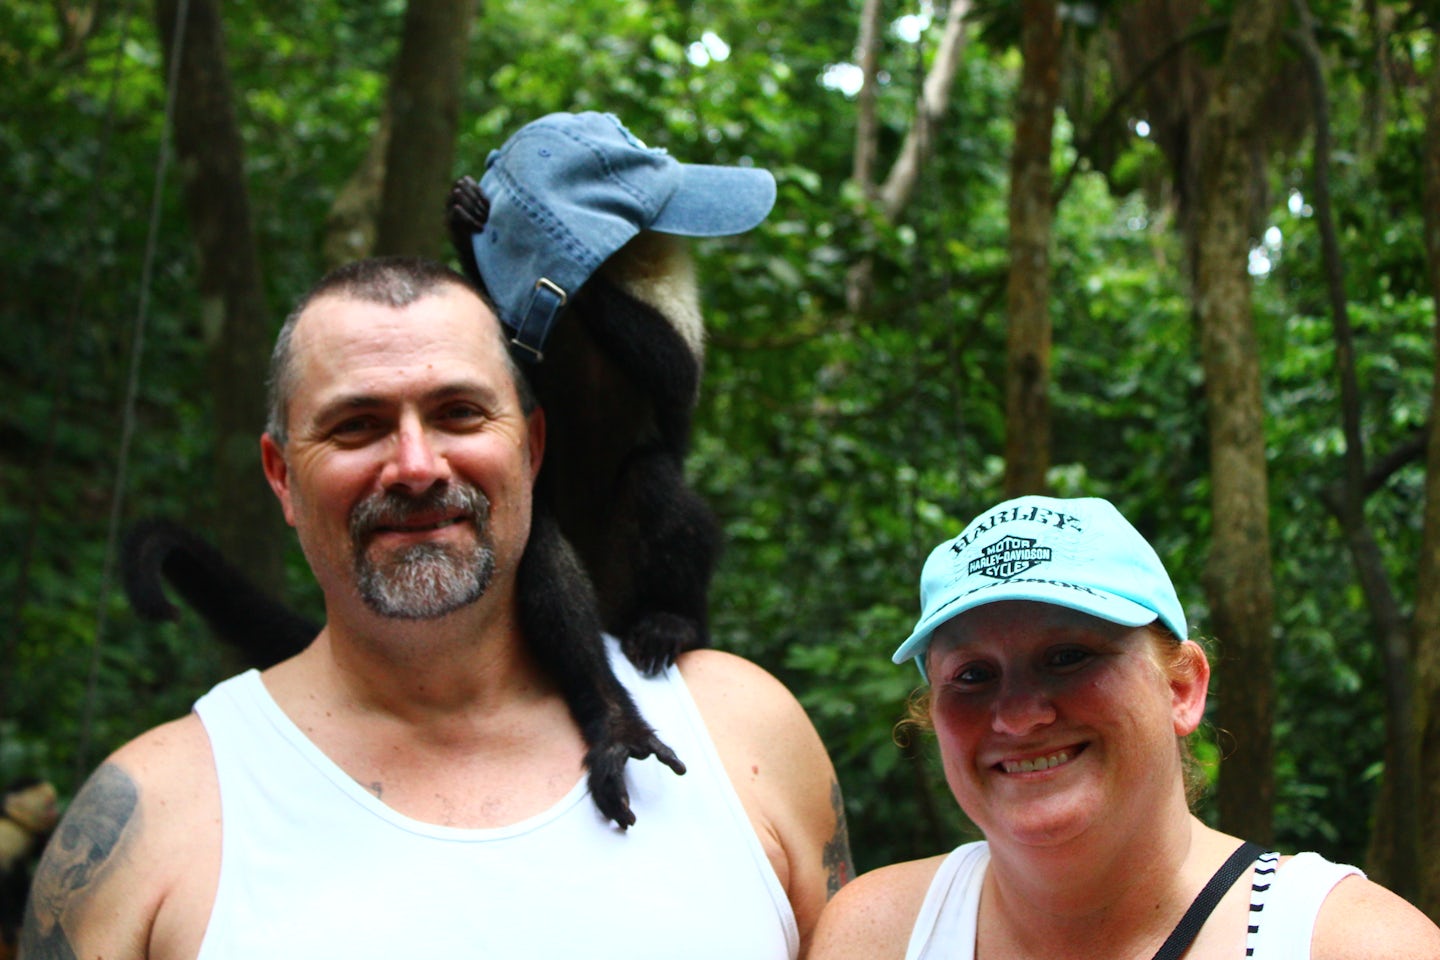 Gambalimba Preservation Park. Monkey stole his hat and had to try it on. Wh